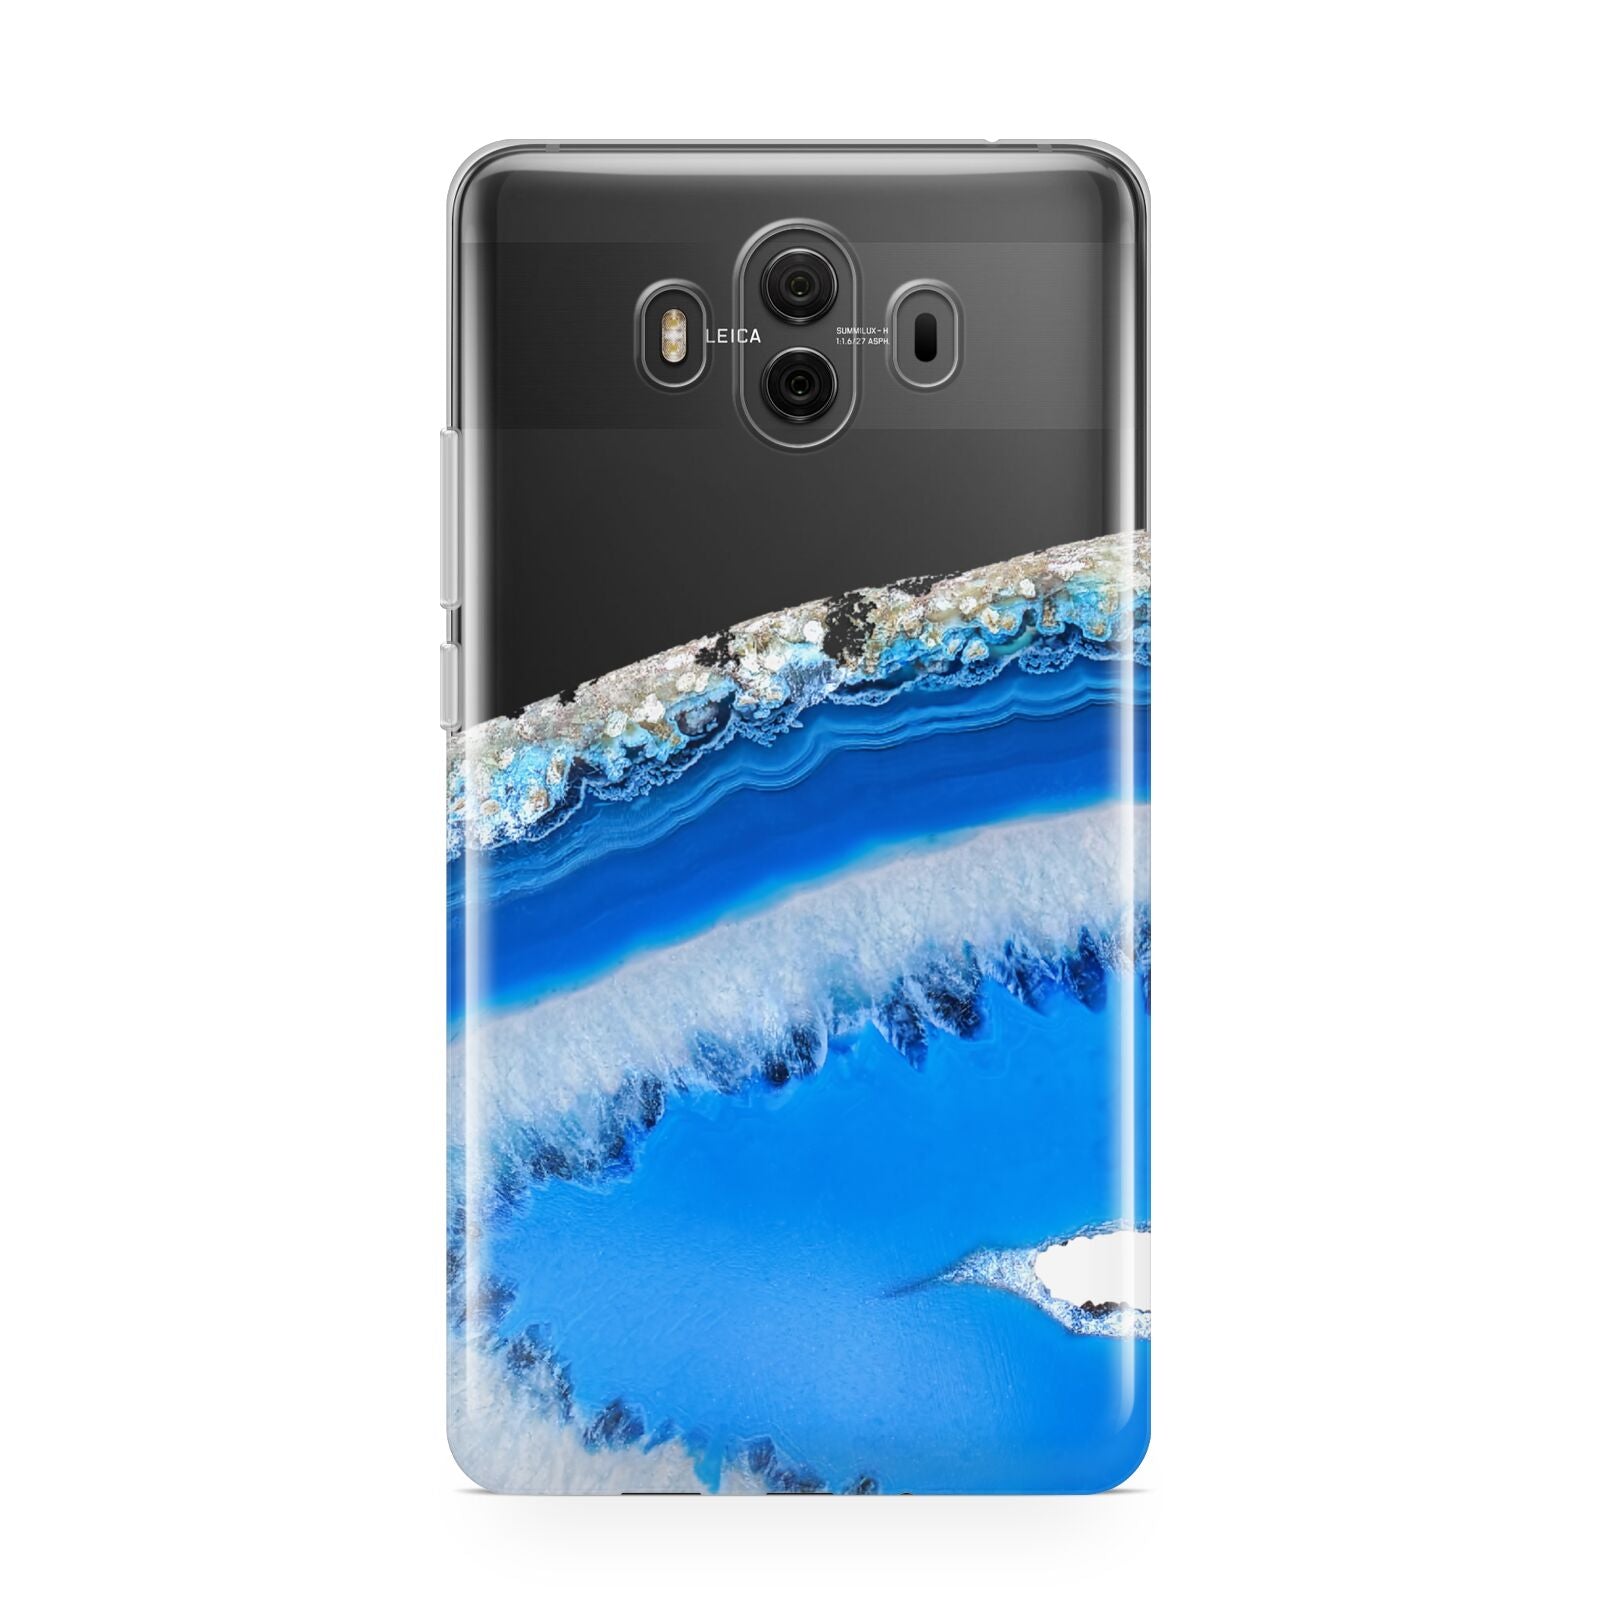 Agate Blue Huawei Mate 10 Protective Phone Case